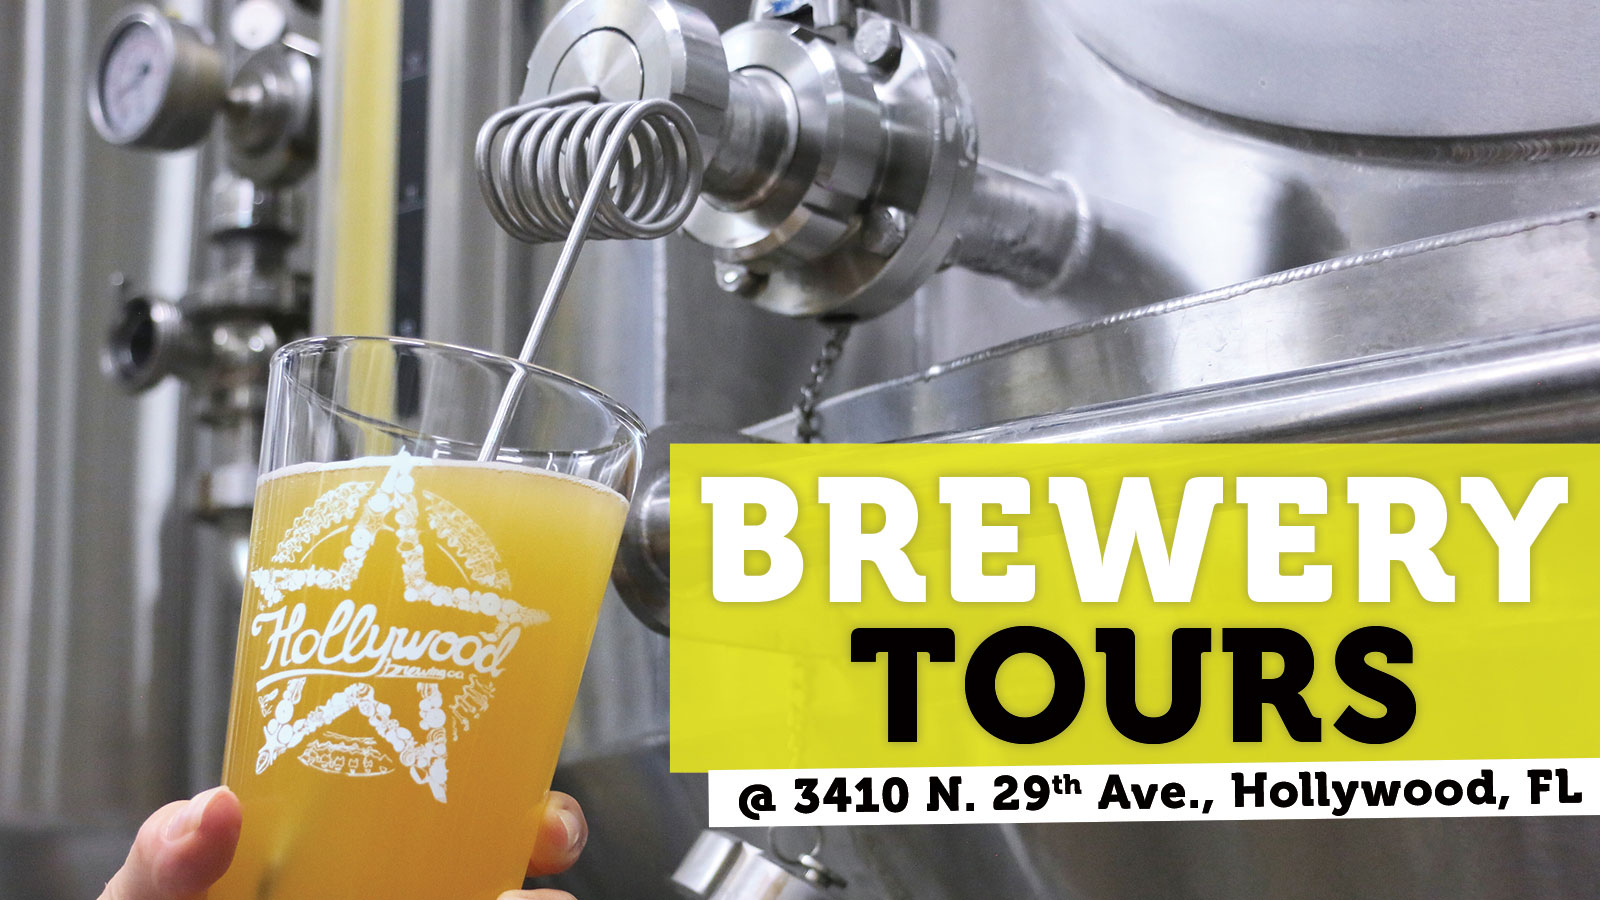 Tours Banner Hollywood Brewing_1600px